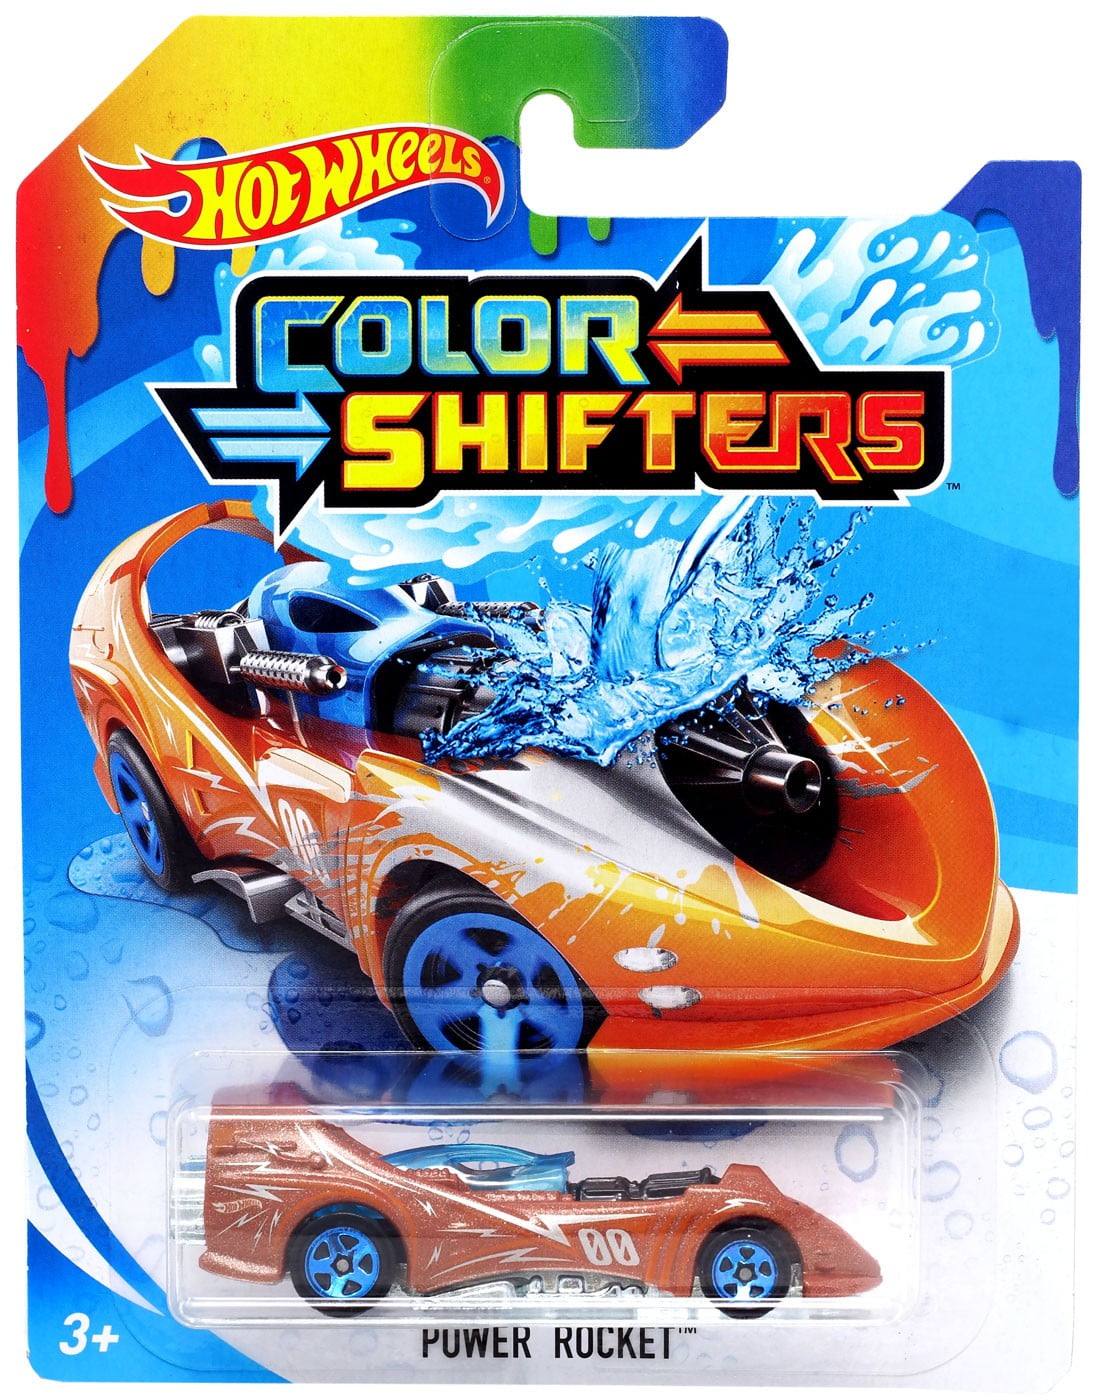 NEW Hot Wheels Color Shifters Color Splash Science Lab Playset Birthday Gift 